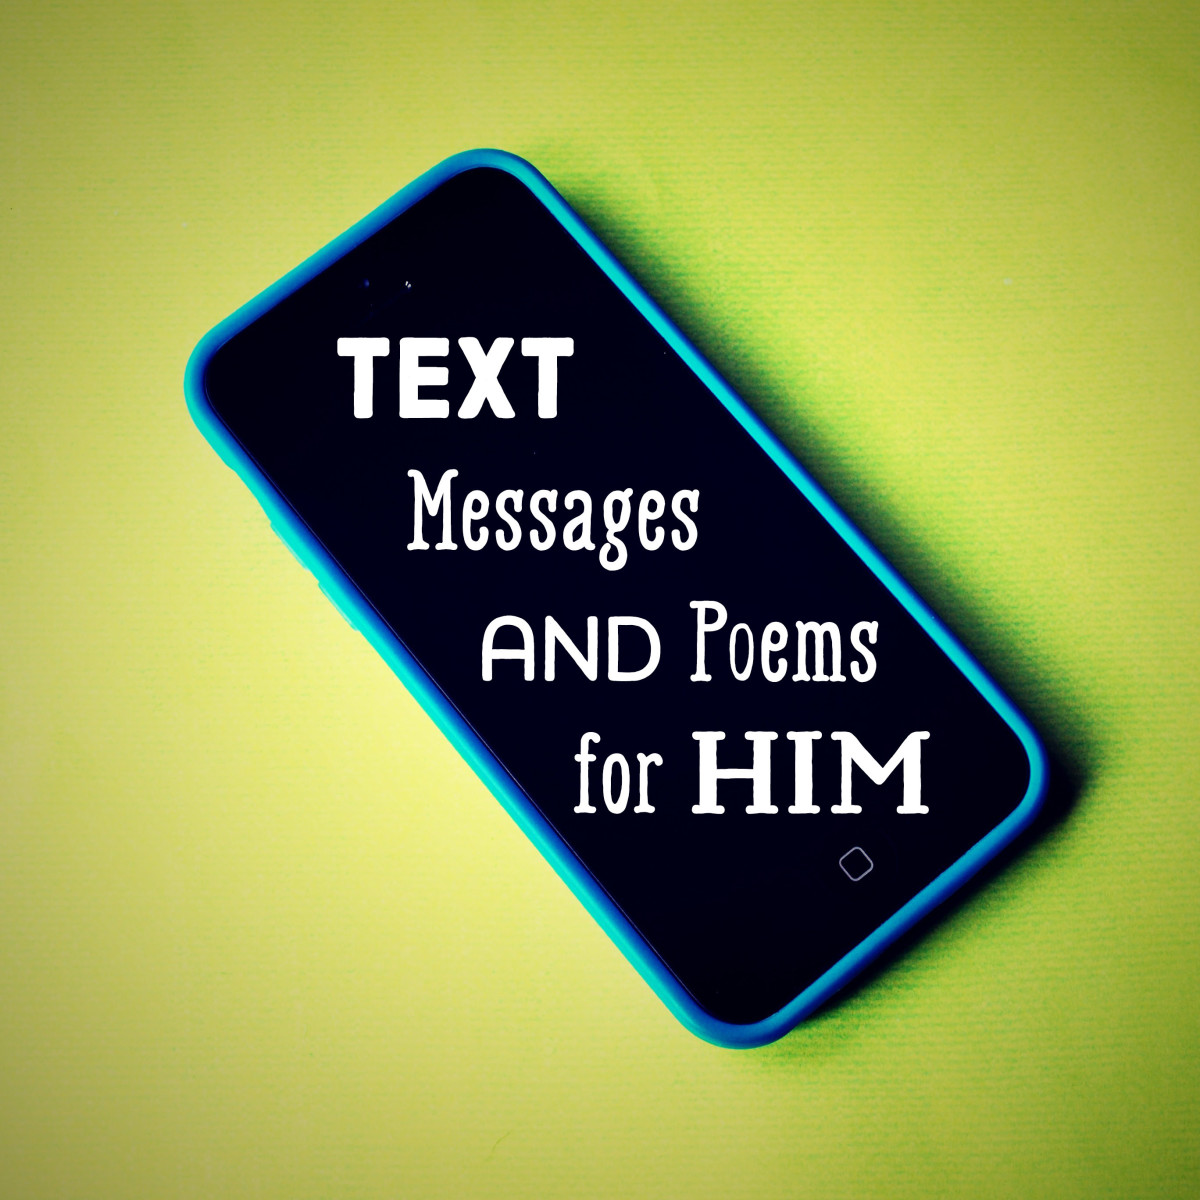 Text messages and poems for him.